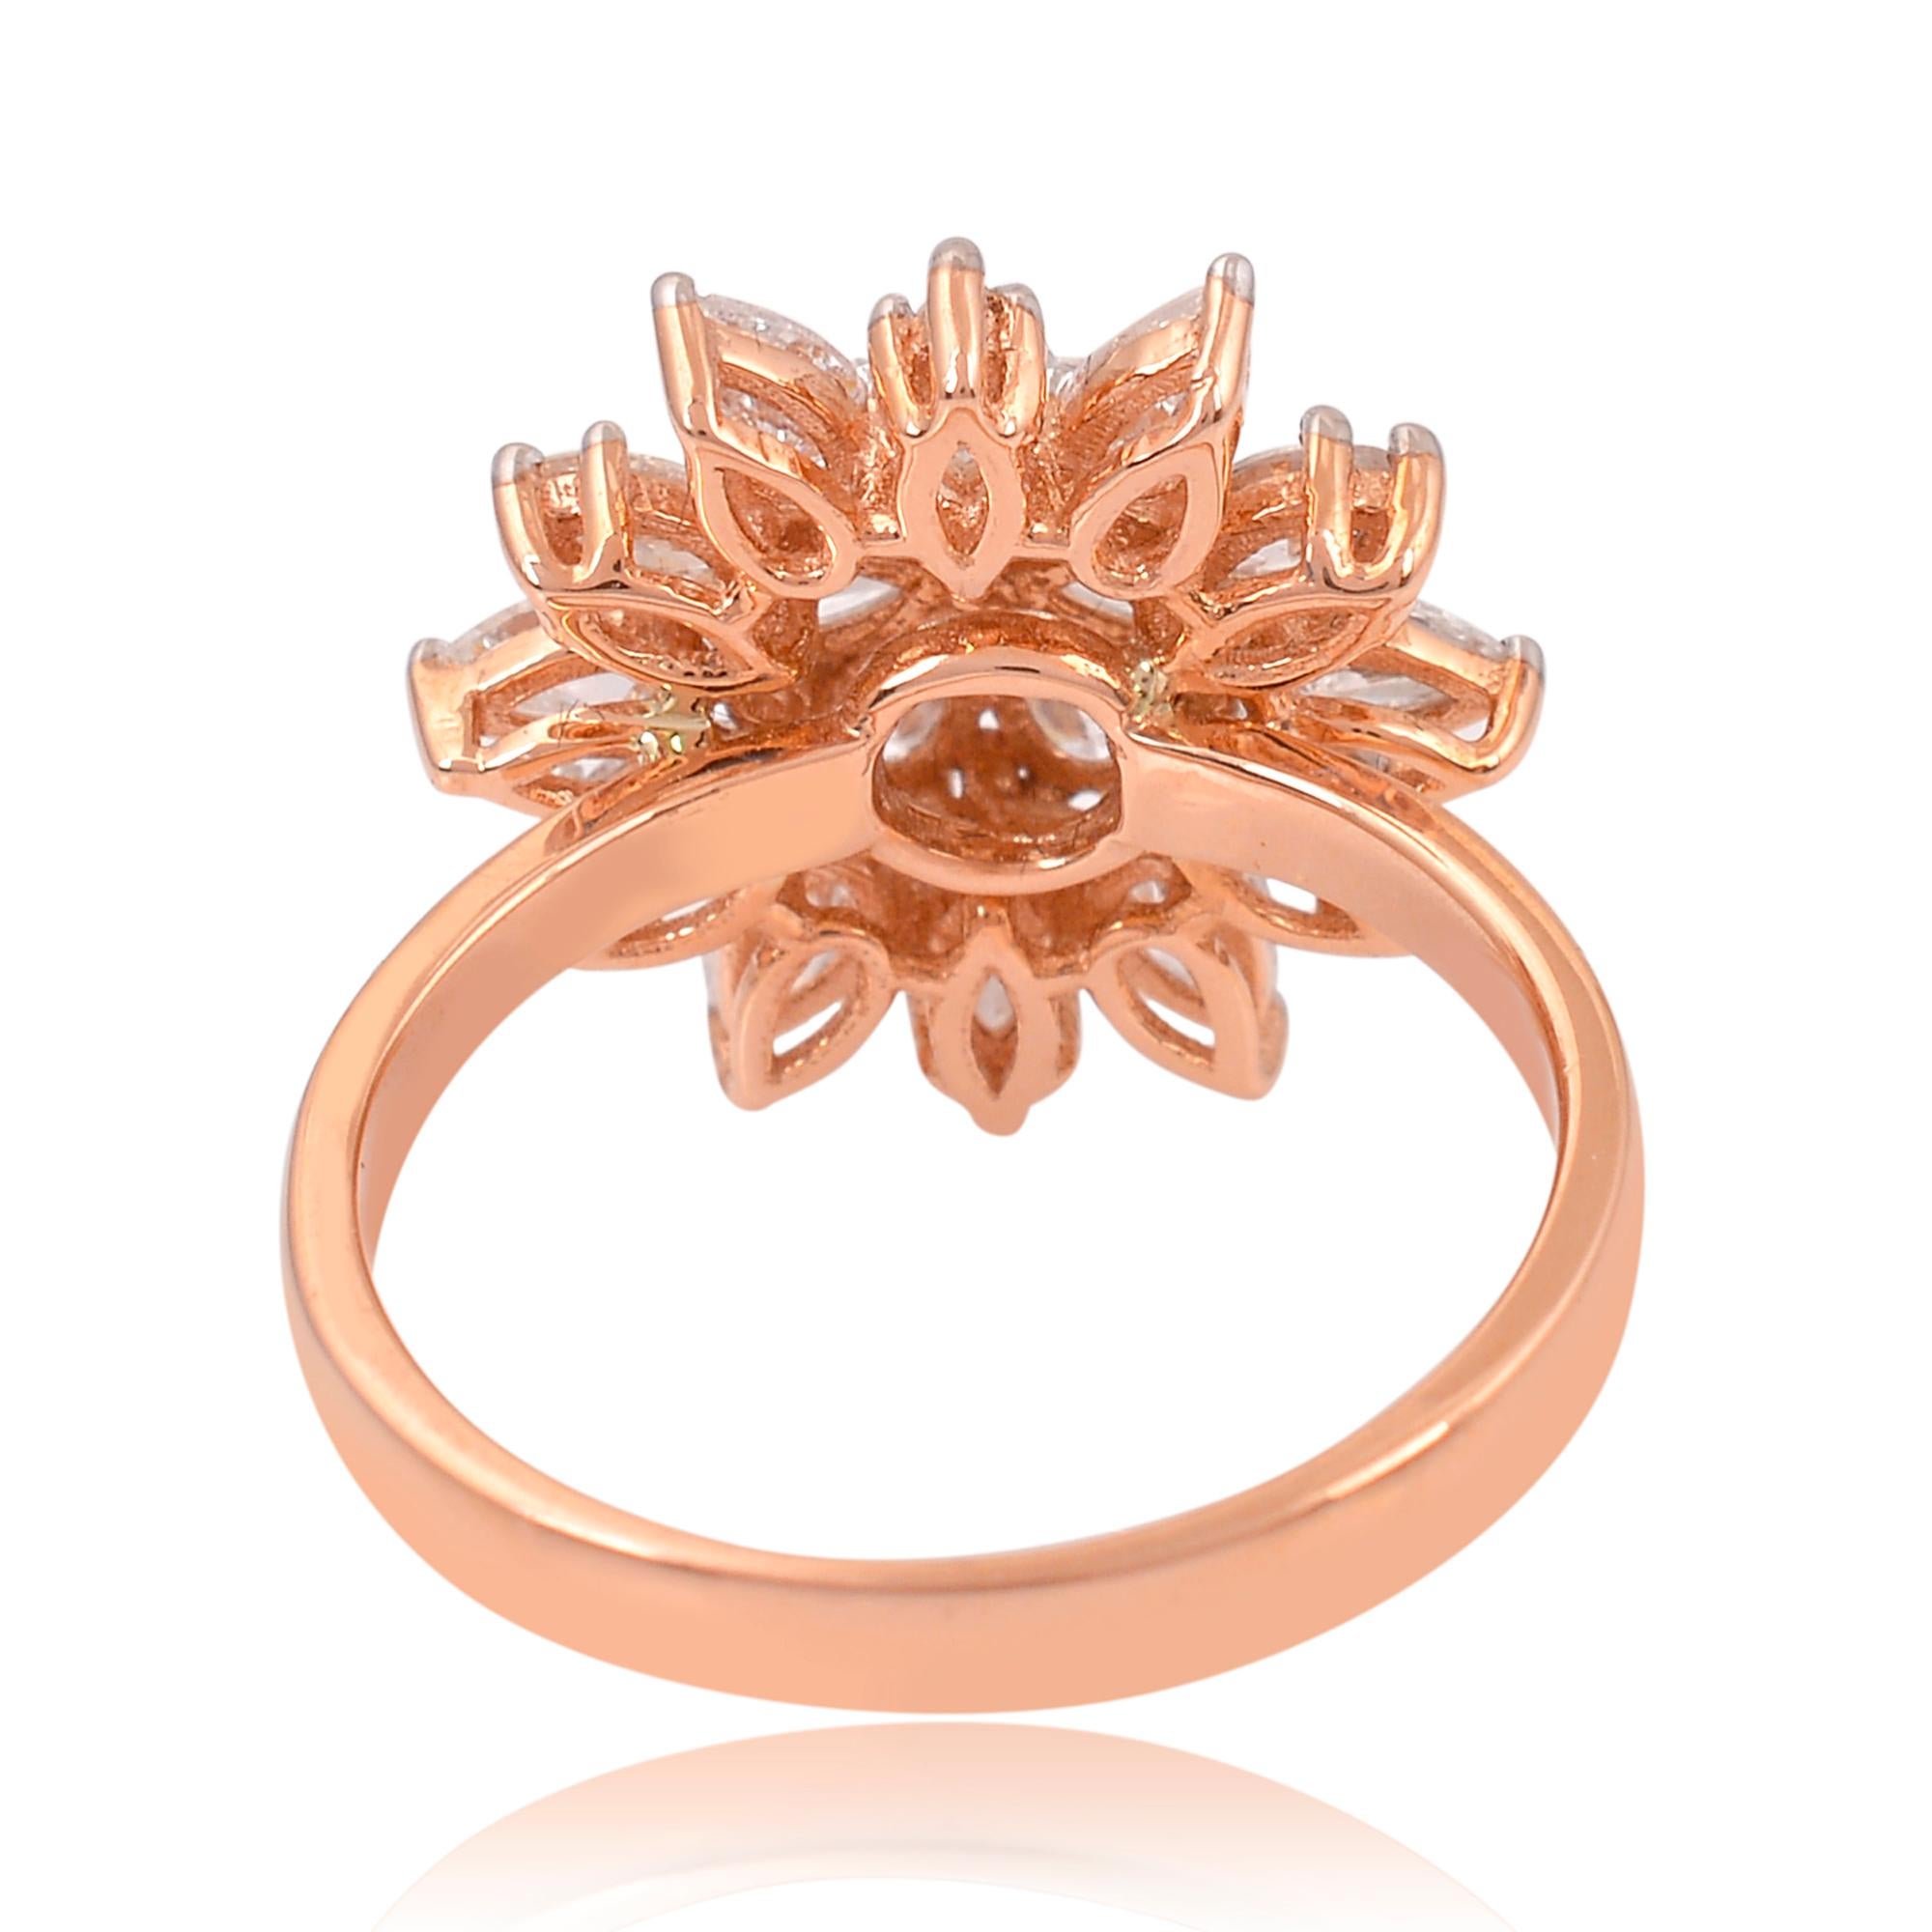 For Sale:  1.70 Carat SI Clarity HI Color Pear Marquise Diamond Ring 18 Karat Rose Gold 2